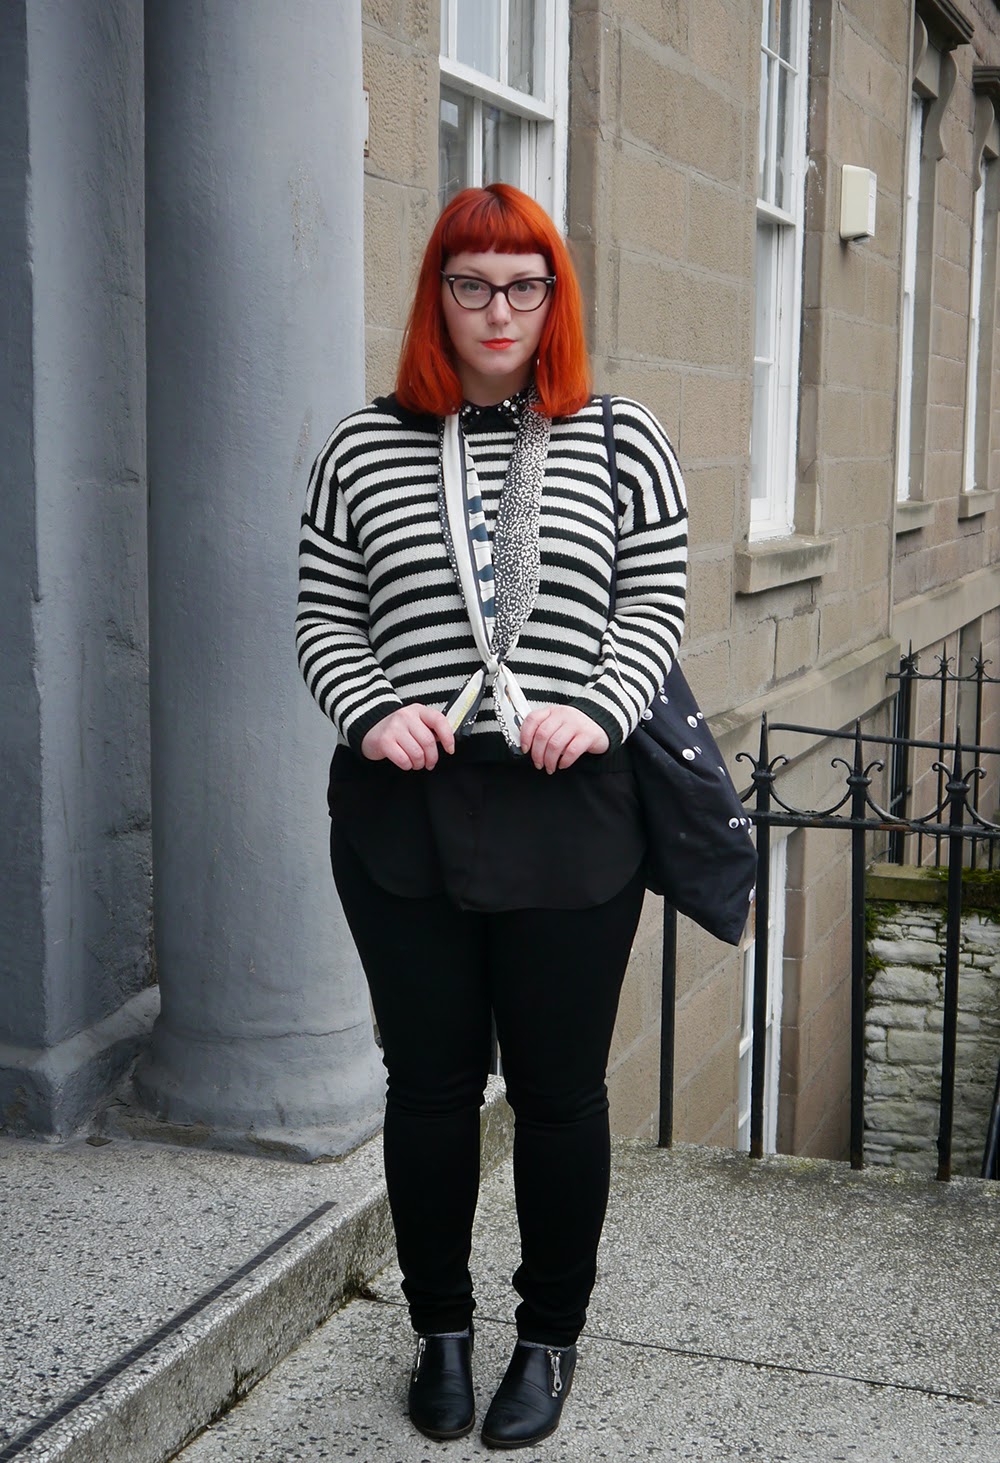 Scottish bloggers, Dundee, Dundee Contemporary arts, DCA, Art Exhibition, what Helen wore, monochrome outfite, H&M jewelled collar shirt, stripey Zara Jumper, Karen Mabon penquin Scarf, googley eye bag, red head, scottish street style, Dundee street style, Warehouse leopard print coat, comfy clarks shoes, work outfit, workwear, basic black jeans